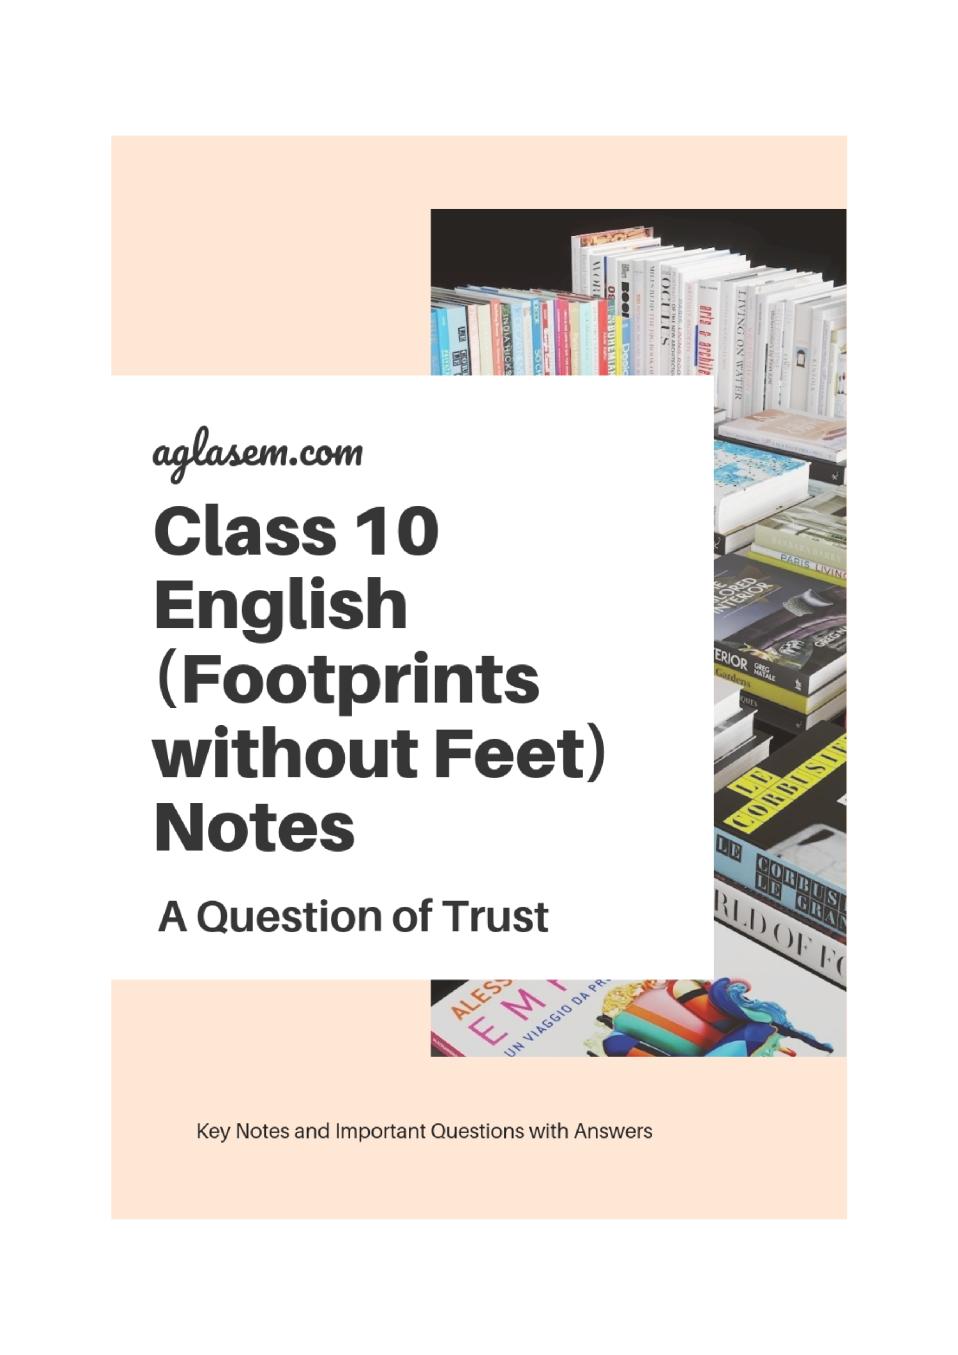 Class 10 English Footprints without Feet Notes For A Question of Trust - Page 1